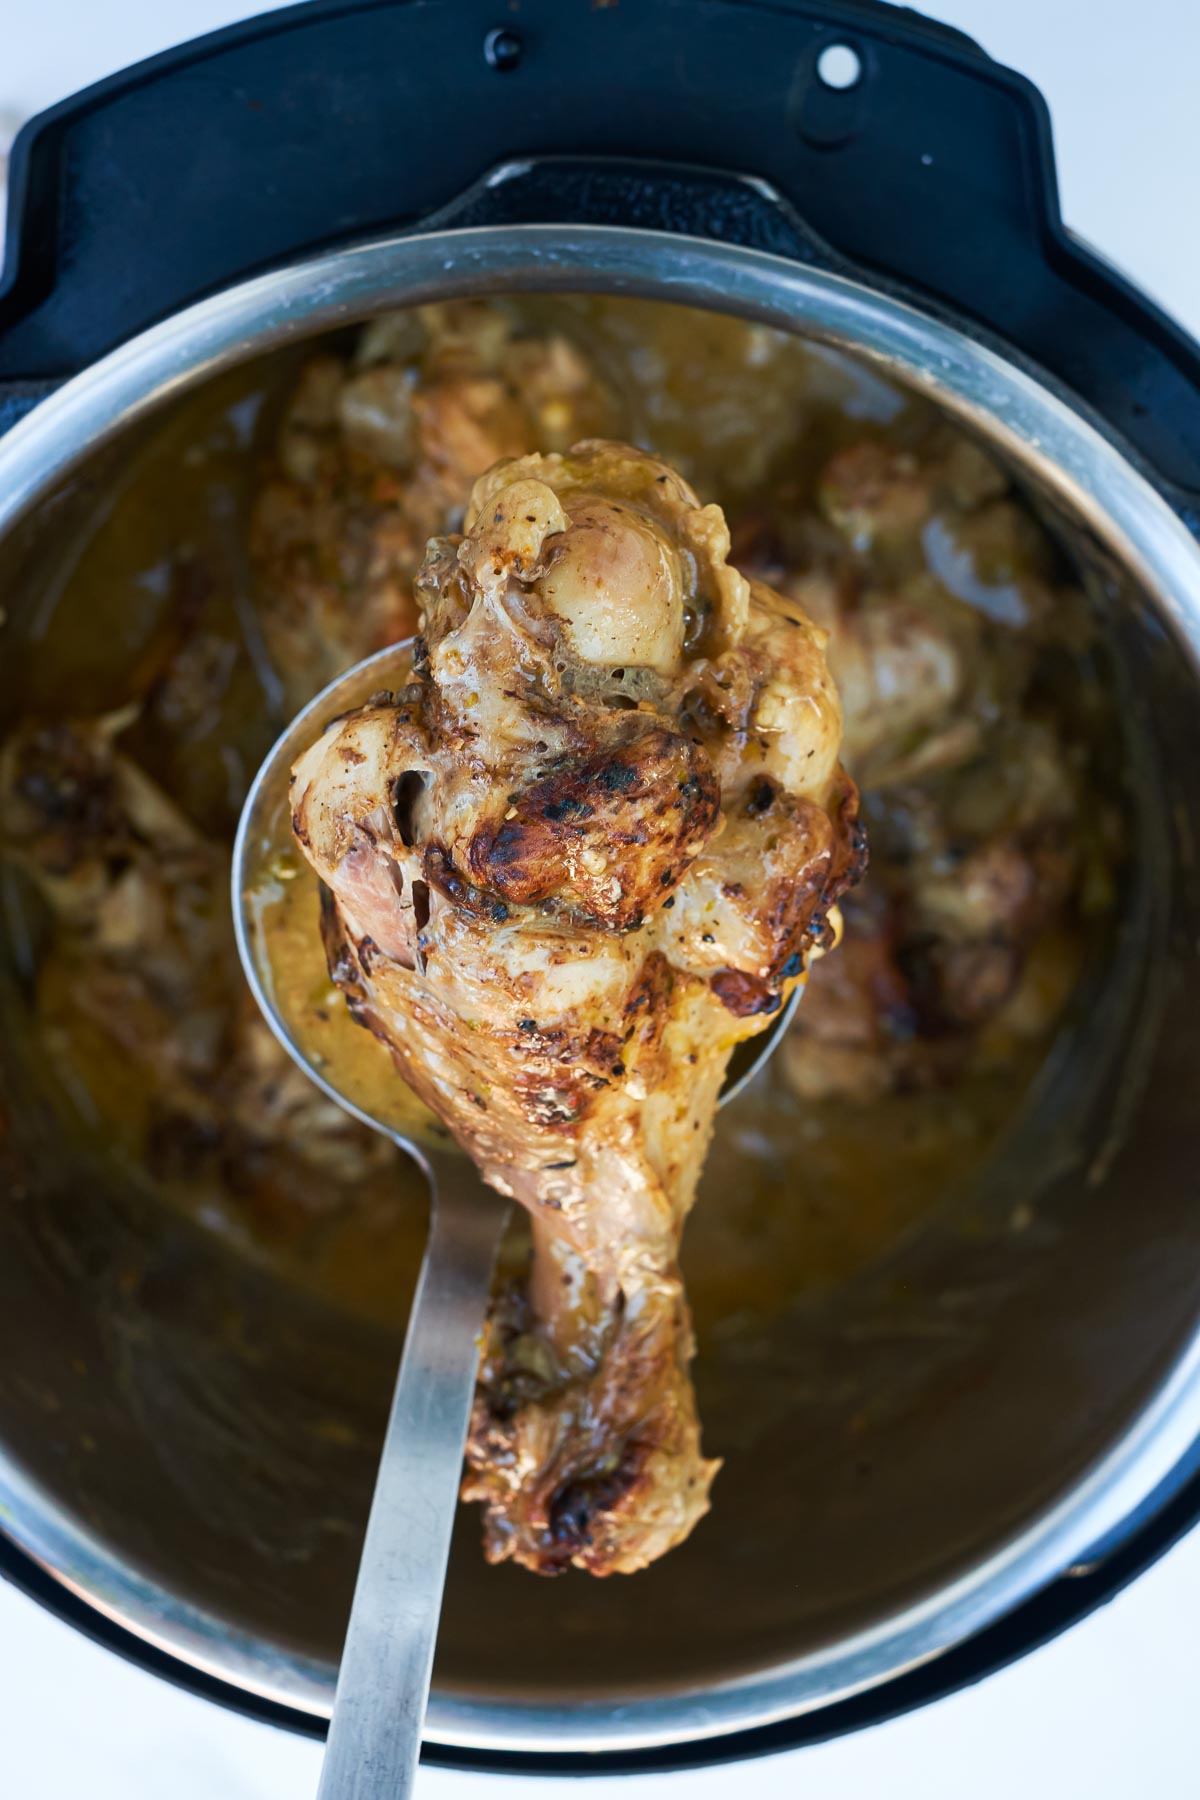 a serving spoon removing one of the cooked turkey wings from the instant pot insert